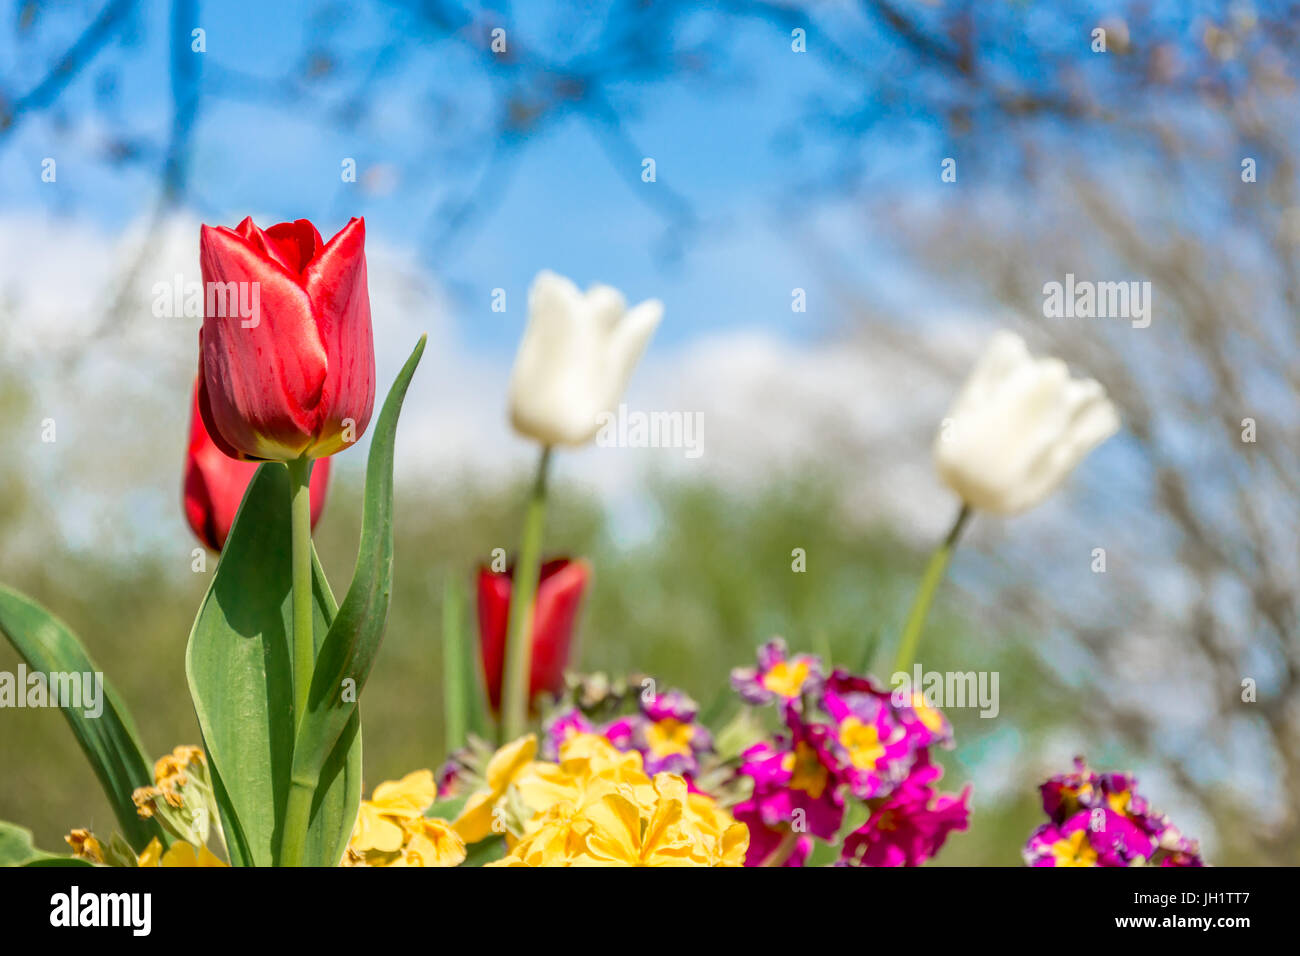 Red tulips in full bloom Stock Photo